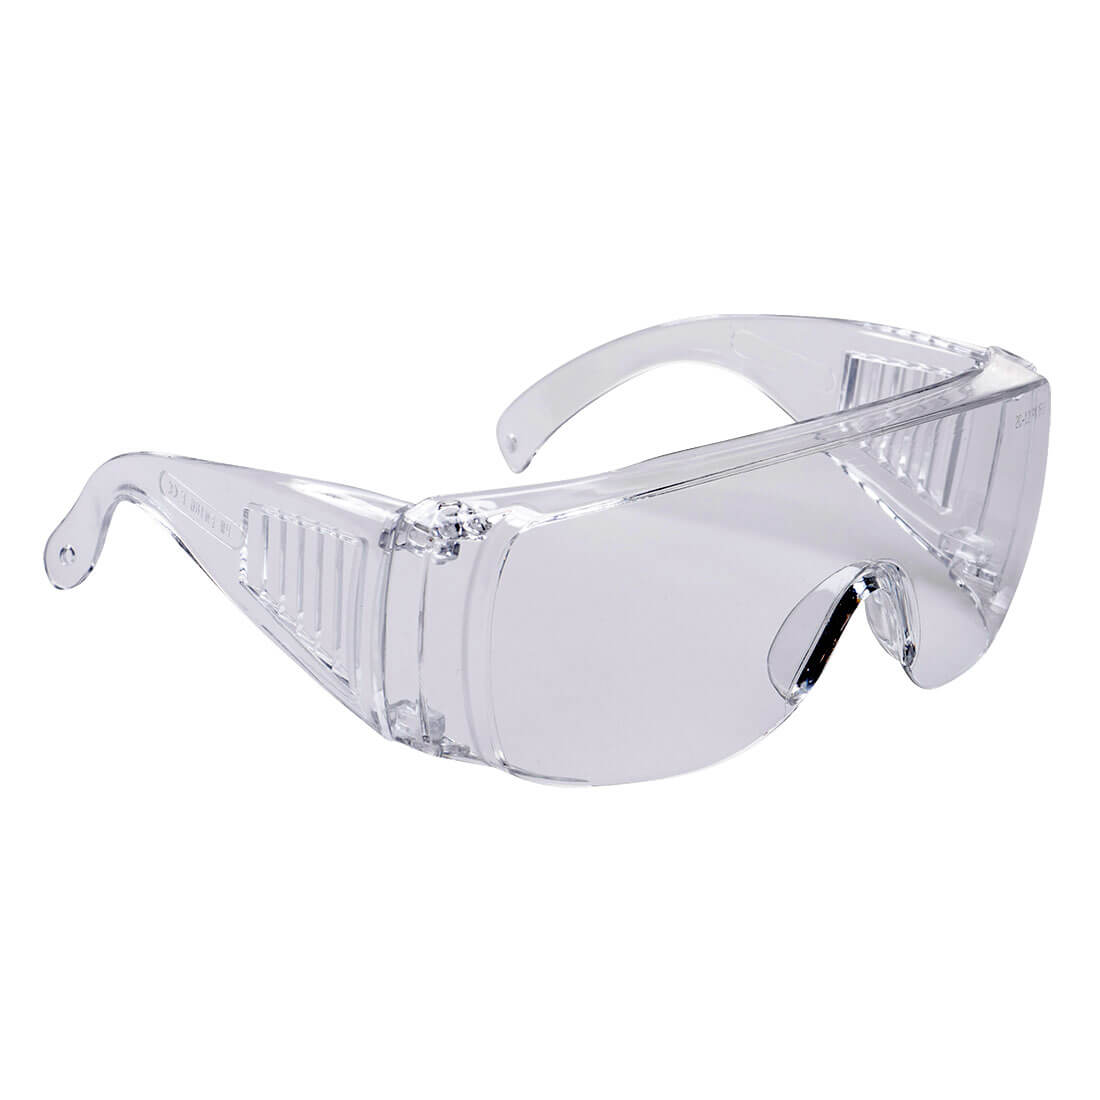 Portwest PW30 Clear Visitors Safety Glasses